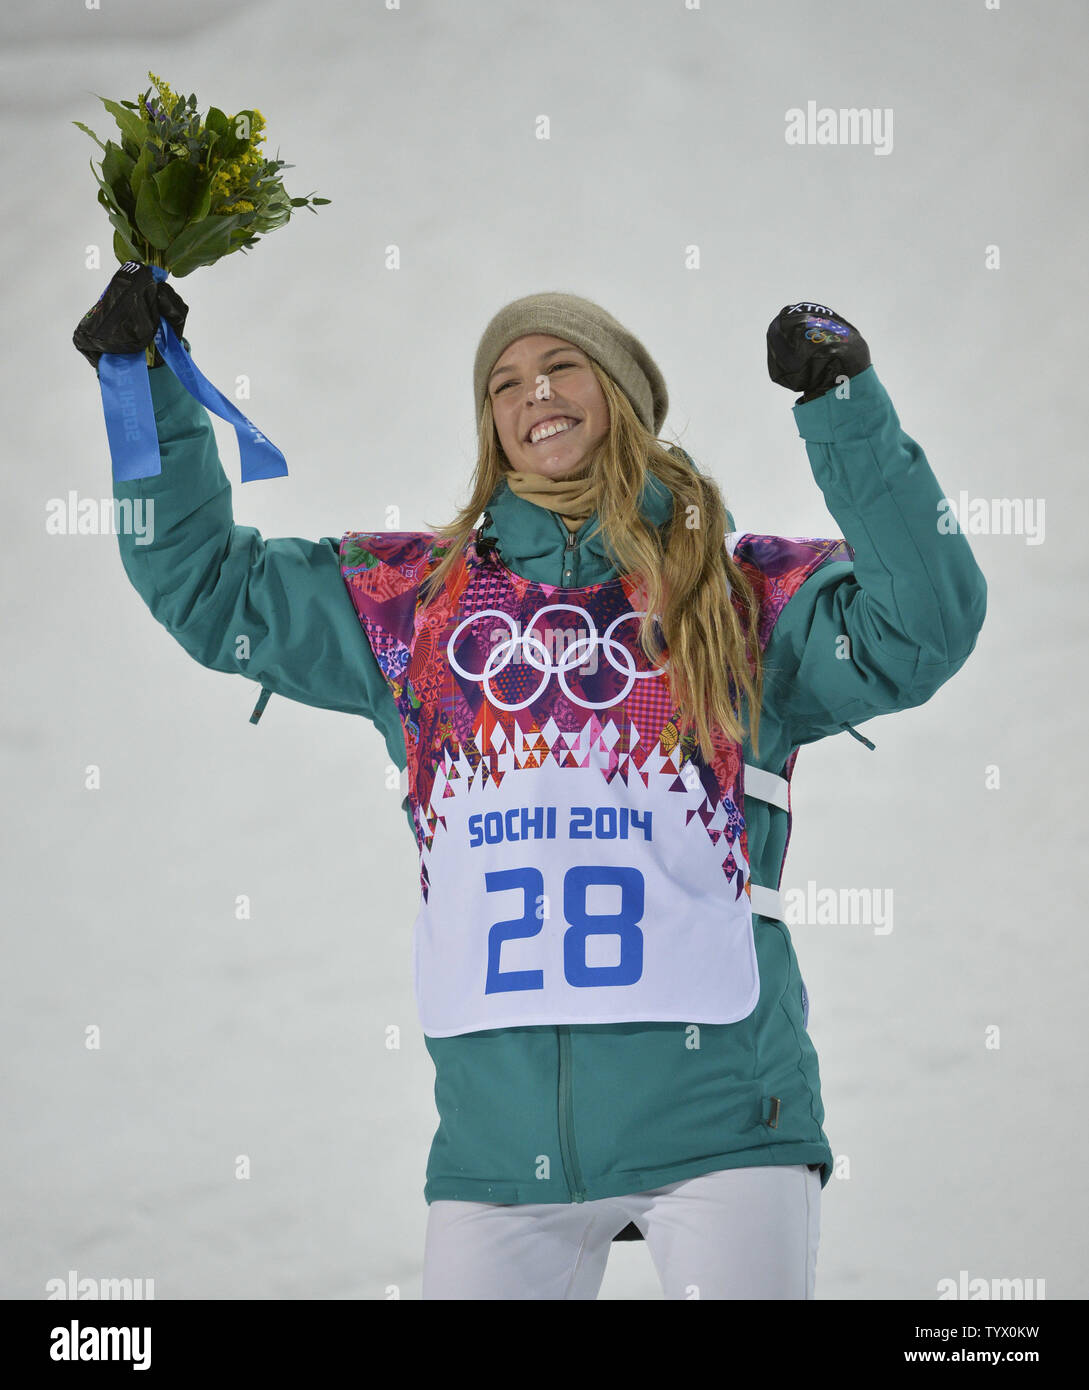 Australia's Torah Bright celebrates during the flower ceremony for the ladies' snowboard halfpipe at the Sochi 2014 Winter Olympics on February 12, 2014 in Krasnaya Polyana, Russia. Bright won a silver medal in the event.      UPI/Brian Kersey Stock Photo